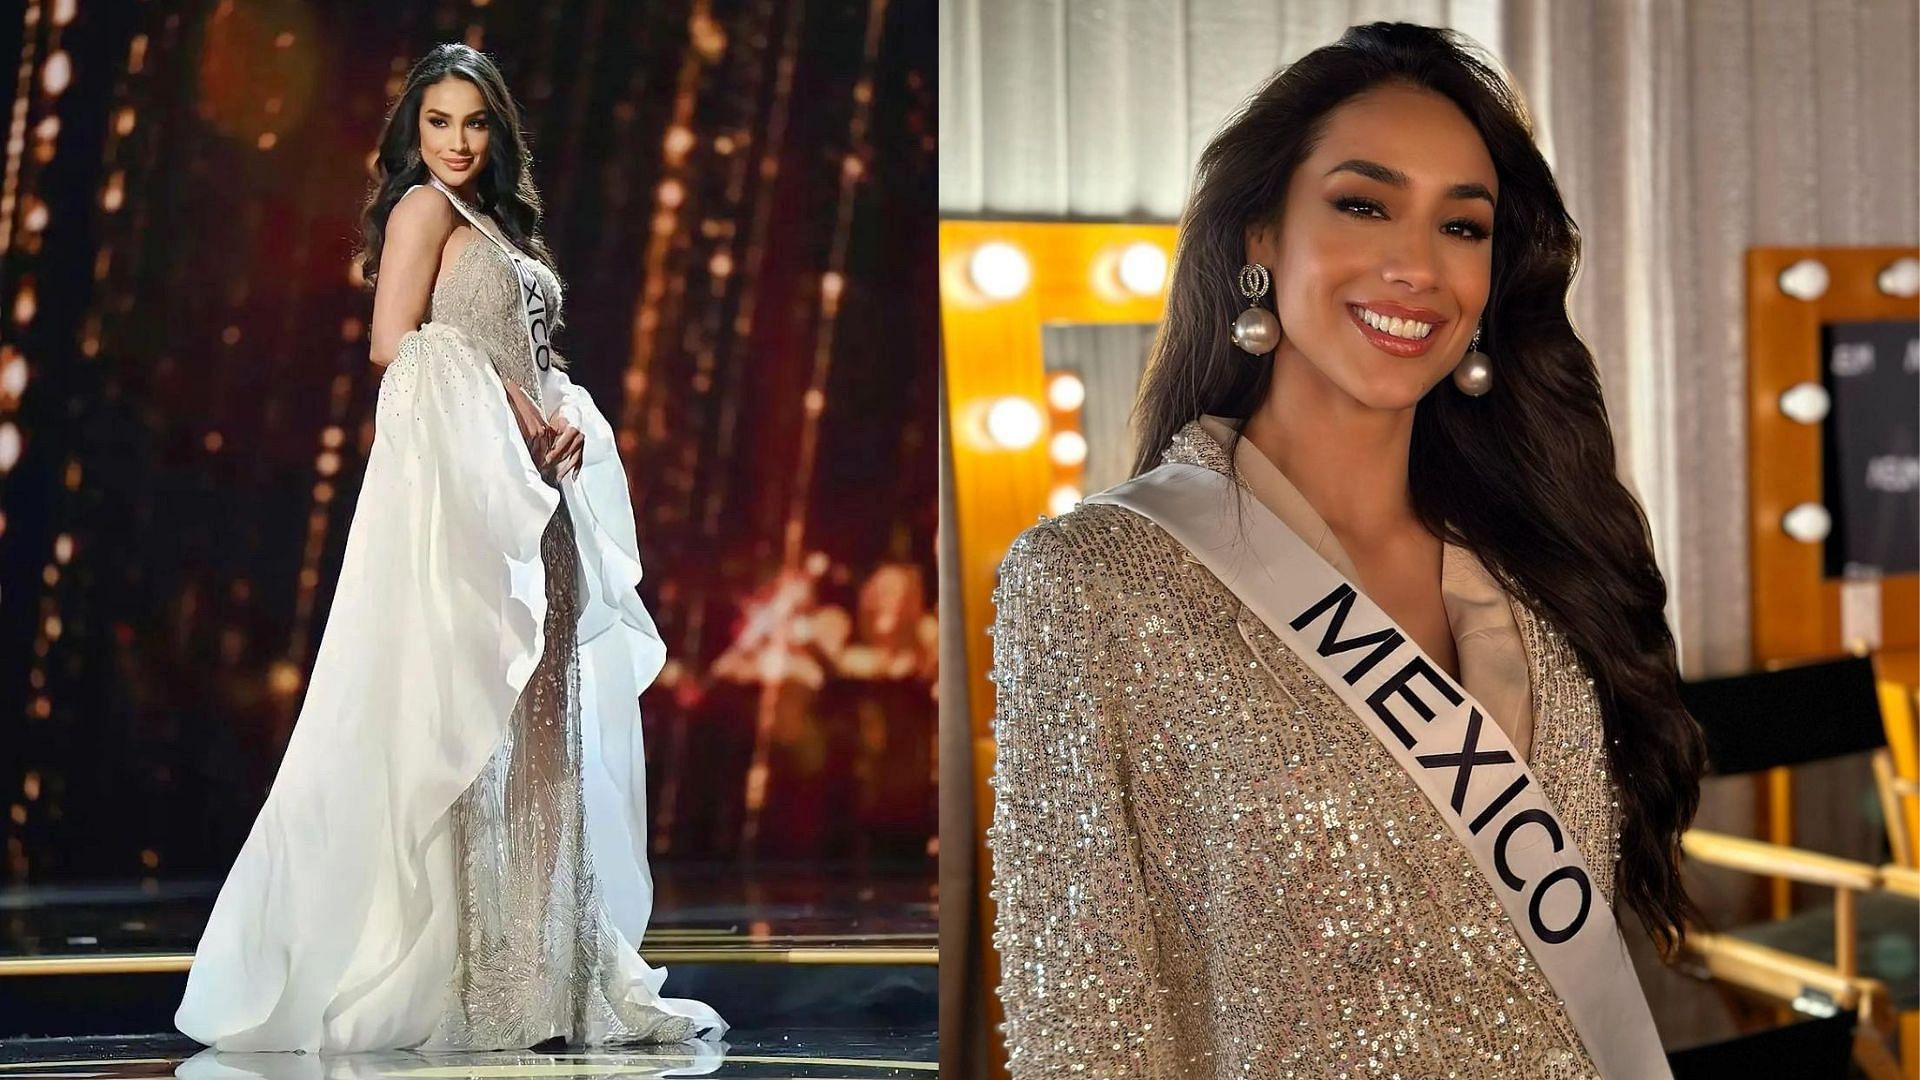 Irma Miranda takes the stage confidently during the 71st Miss Universe contest 2023